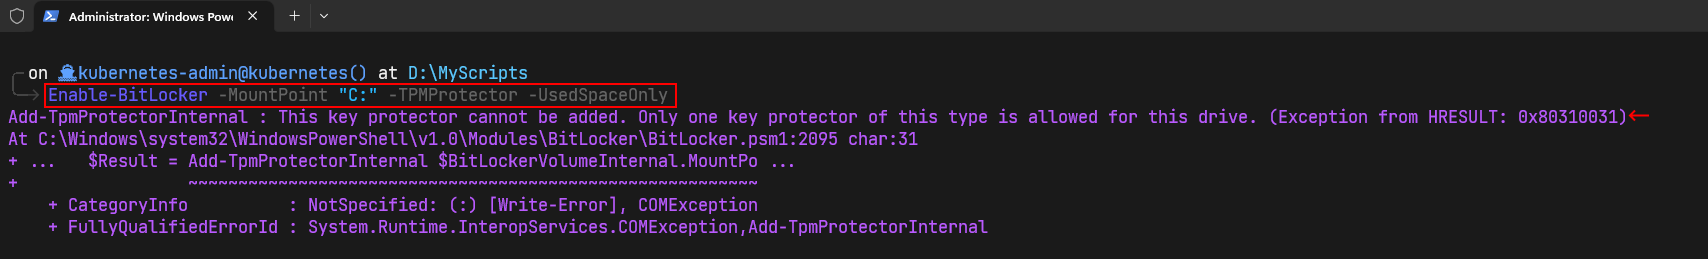 Add-TpmProtectorInternal : This key protector cannot be added. Only one key protector of this type is allowed for this drive. (Exception from HRESULT: 0x80310031)